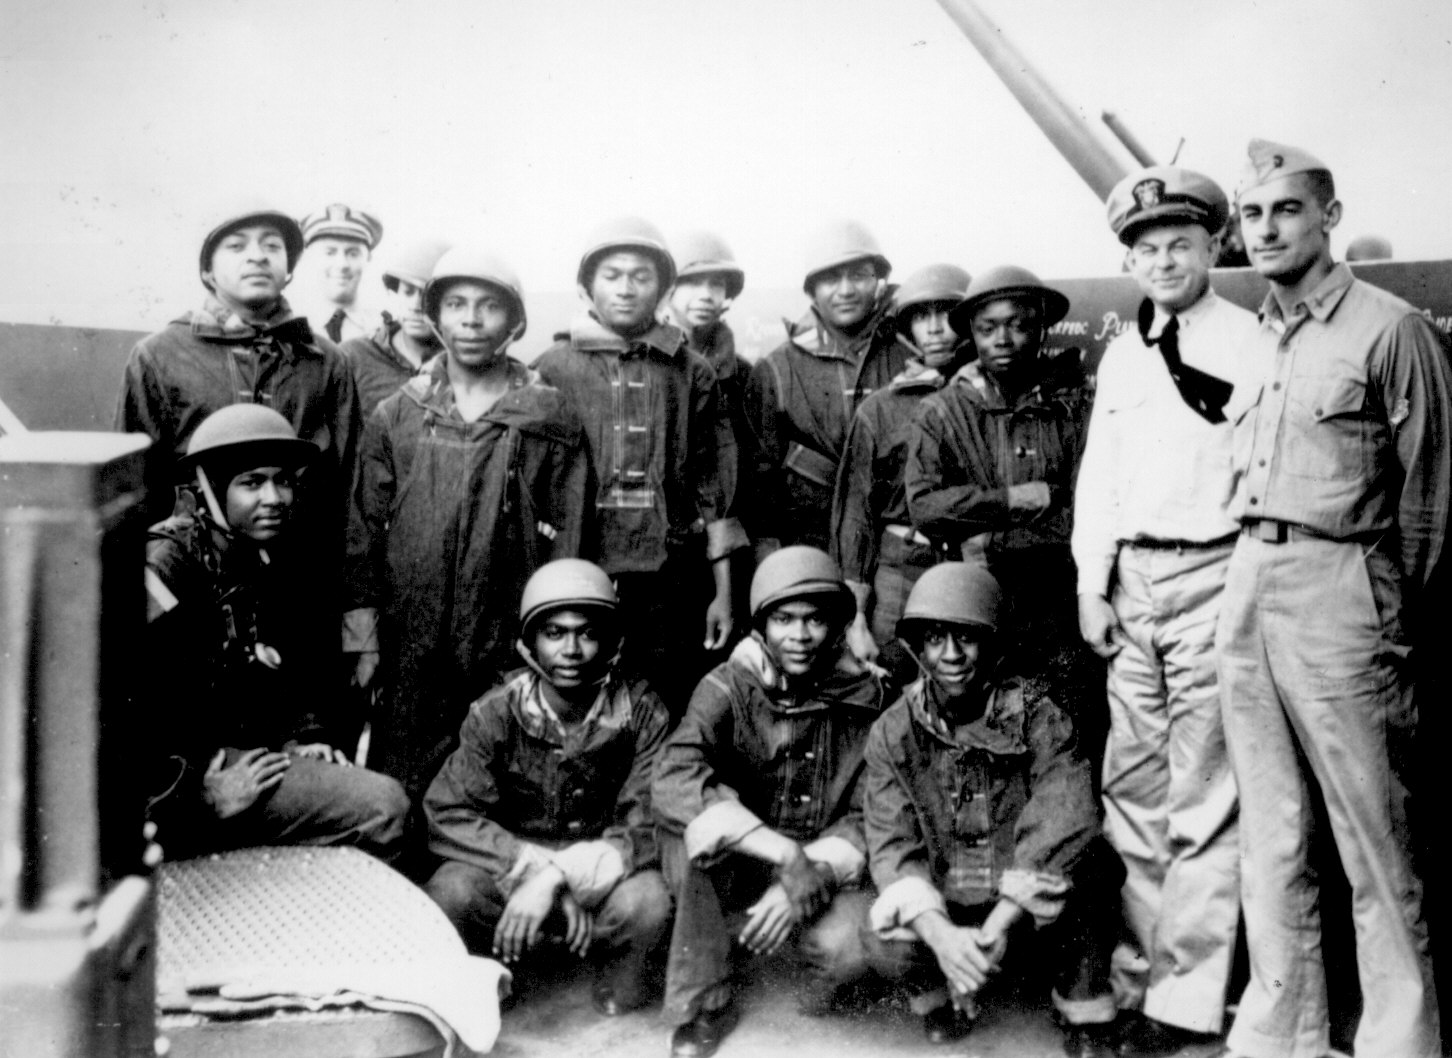 African-American mess attendants/gunners aboard Indianapolis, 10 Jul 1942